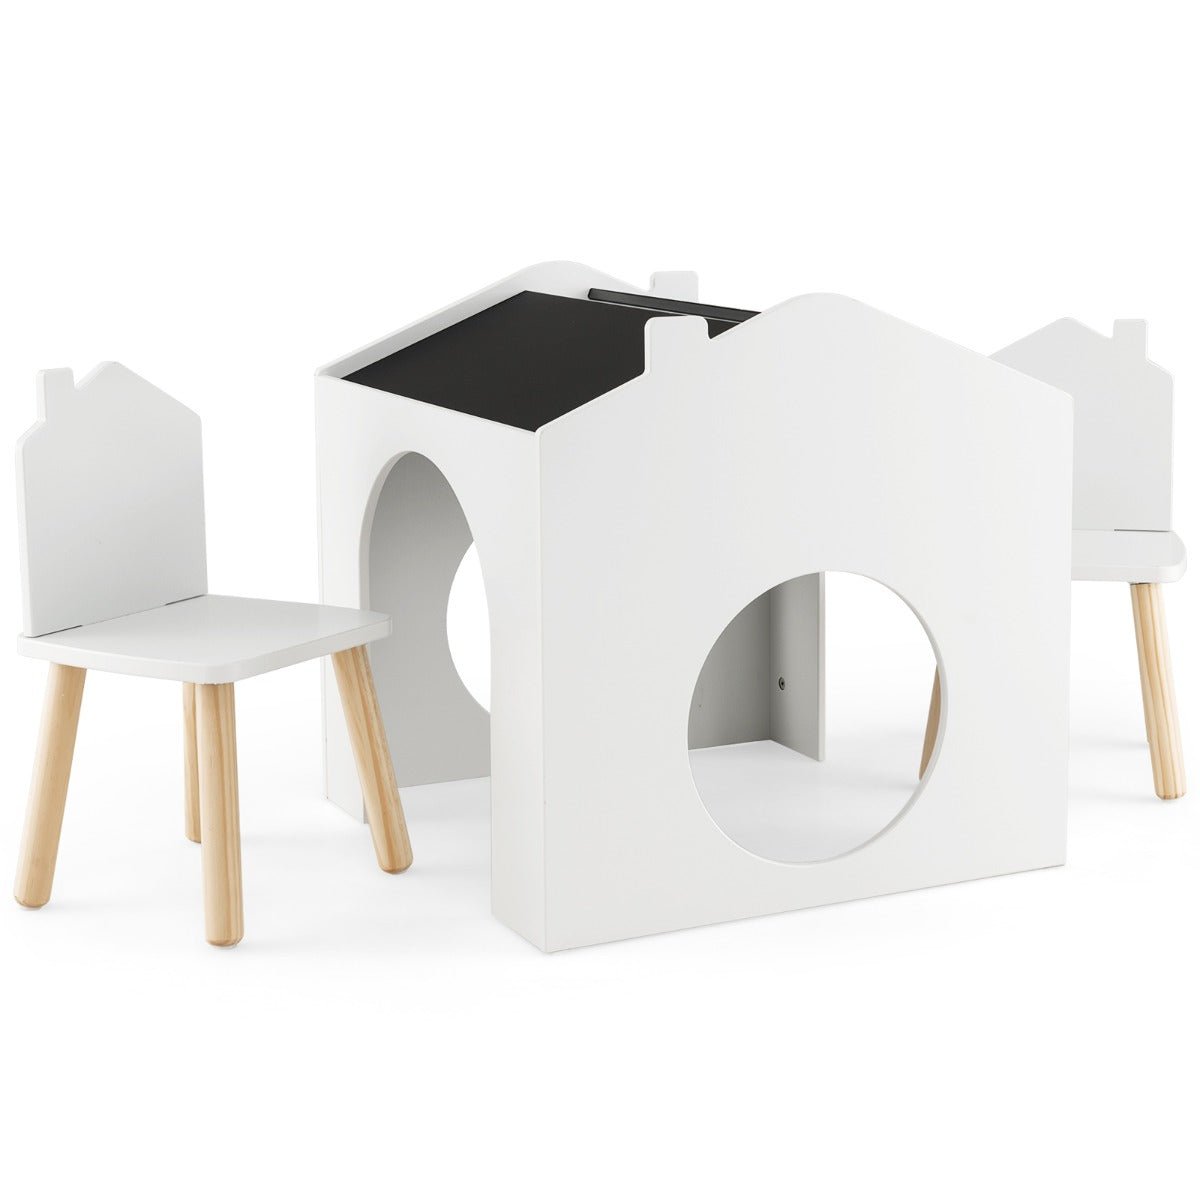 Engaging White Chalkboard Set: Wooden Table and Chairs for Toddlers